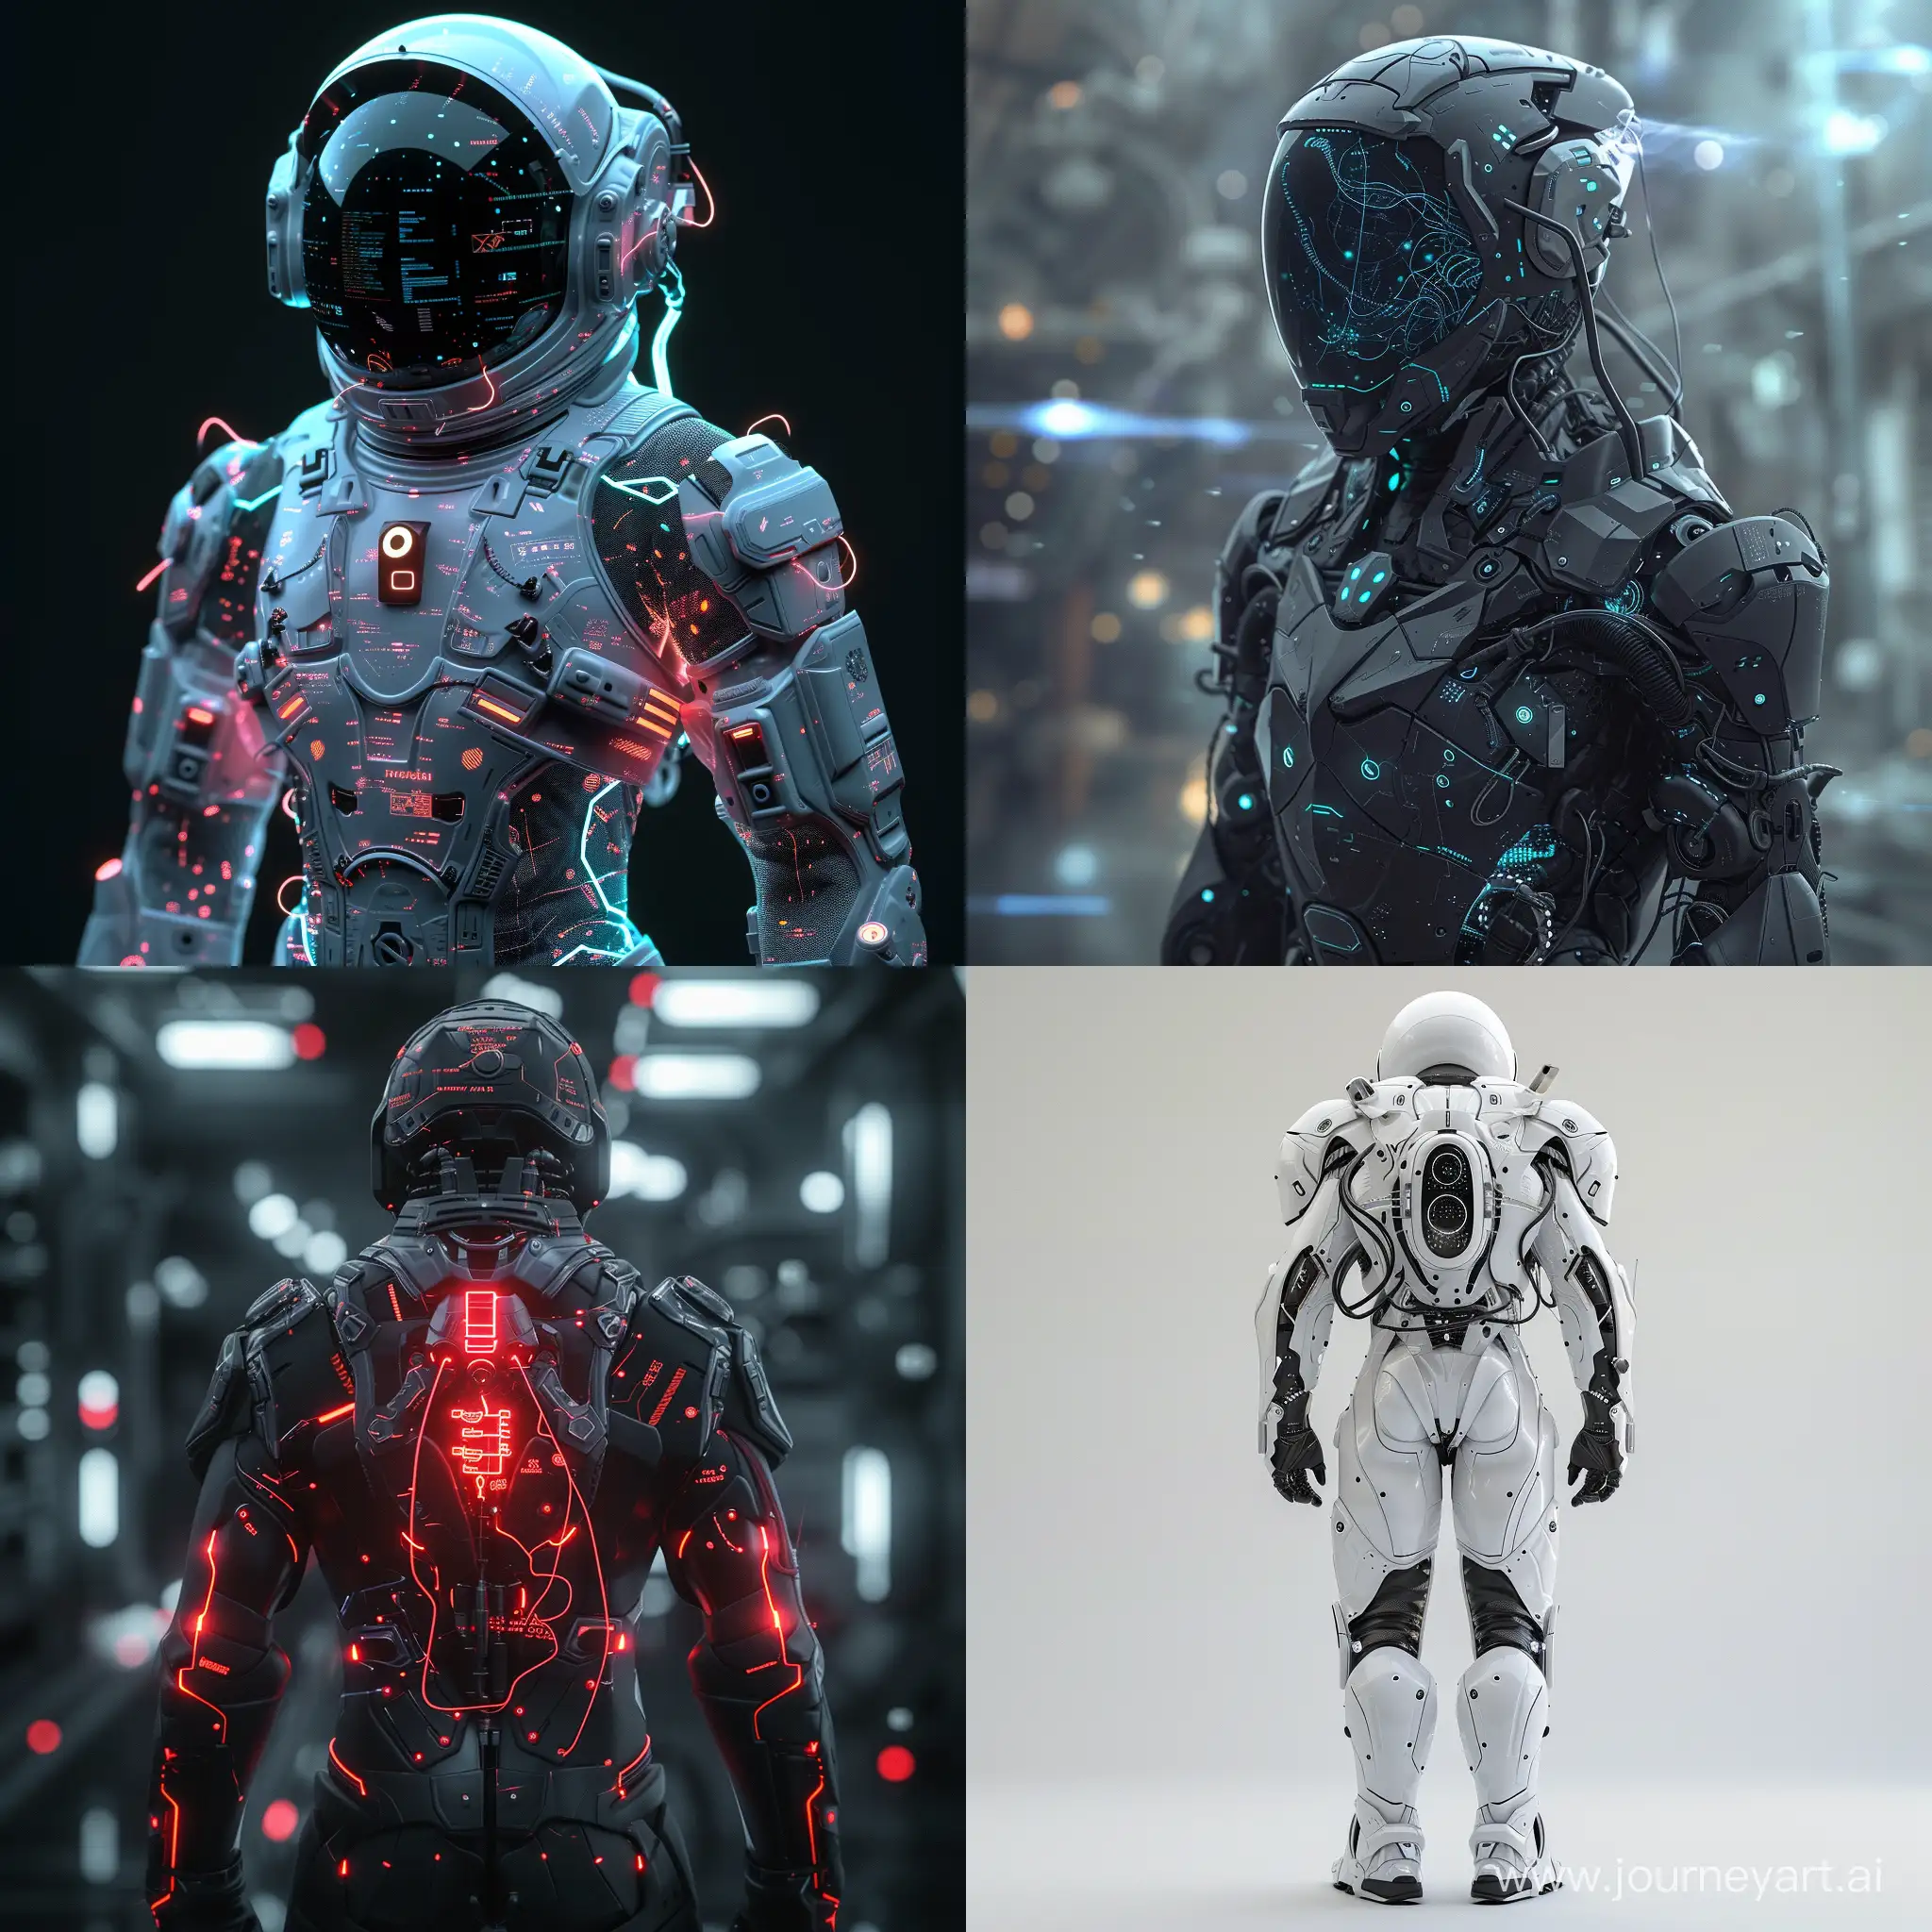 Futuristic-Cyber-Space-Suit-Version-6-with-Augmented-Reality-AR-11